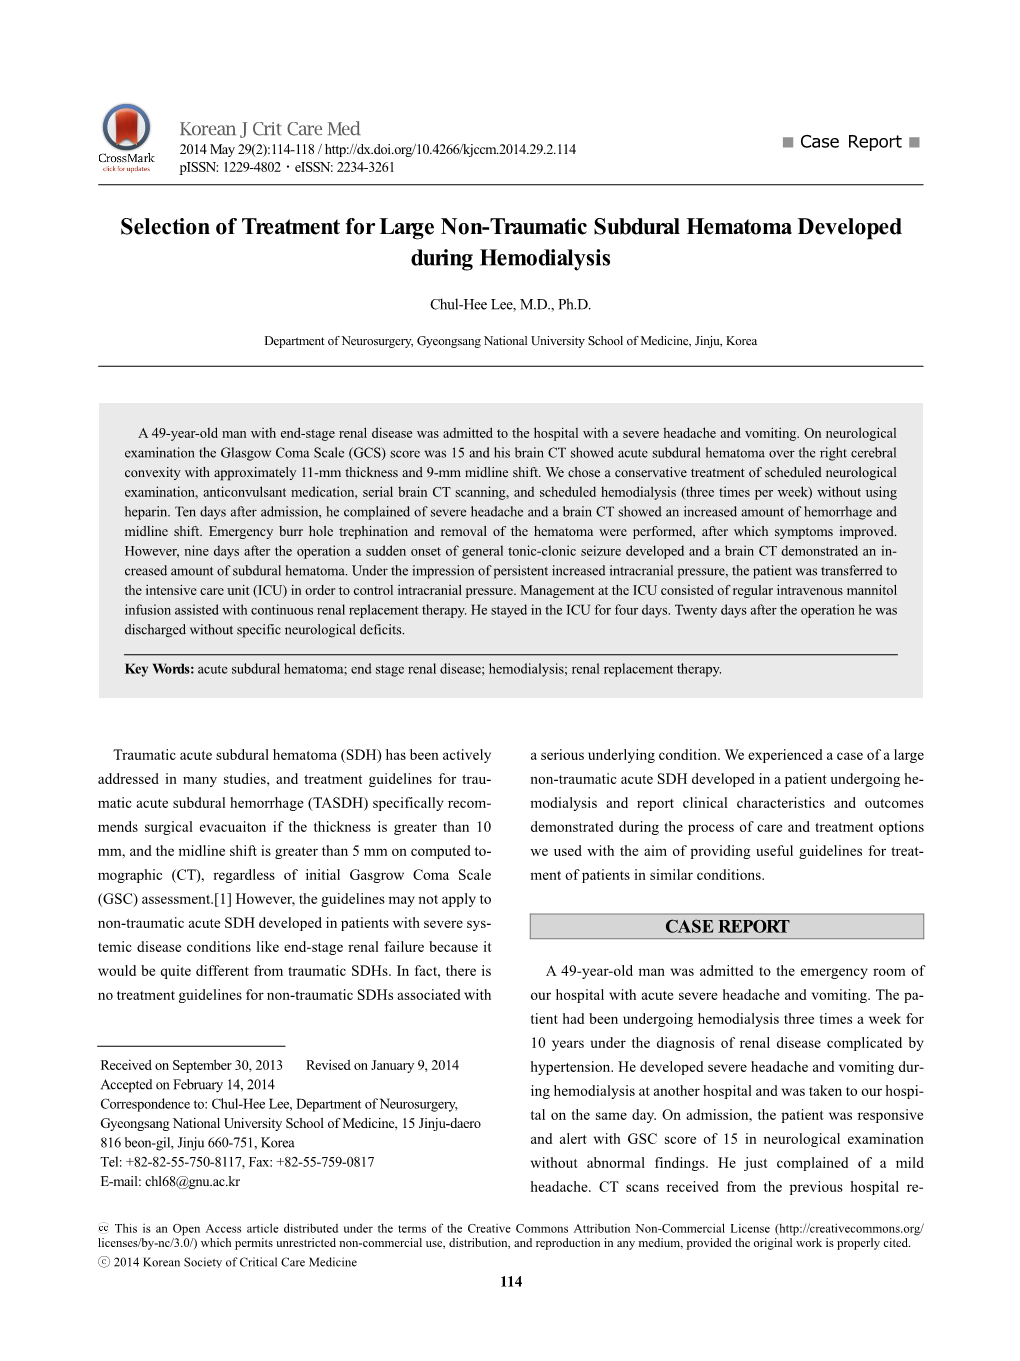 Selection of Treatment for Large Non-Traumatic Subdural Hematoma Developed During Hemodialysis